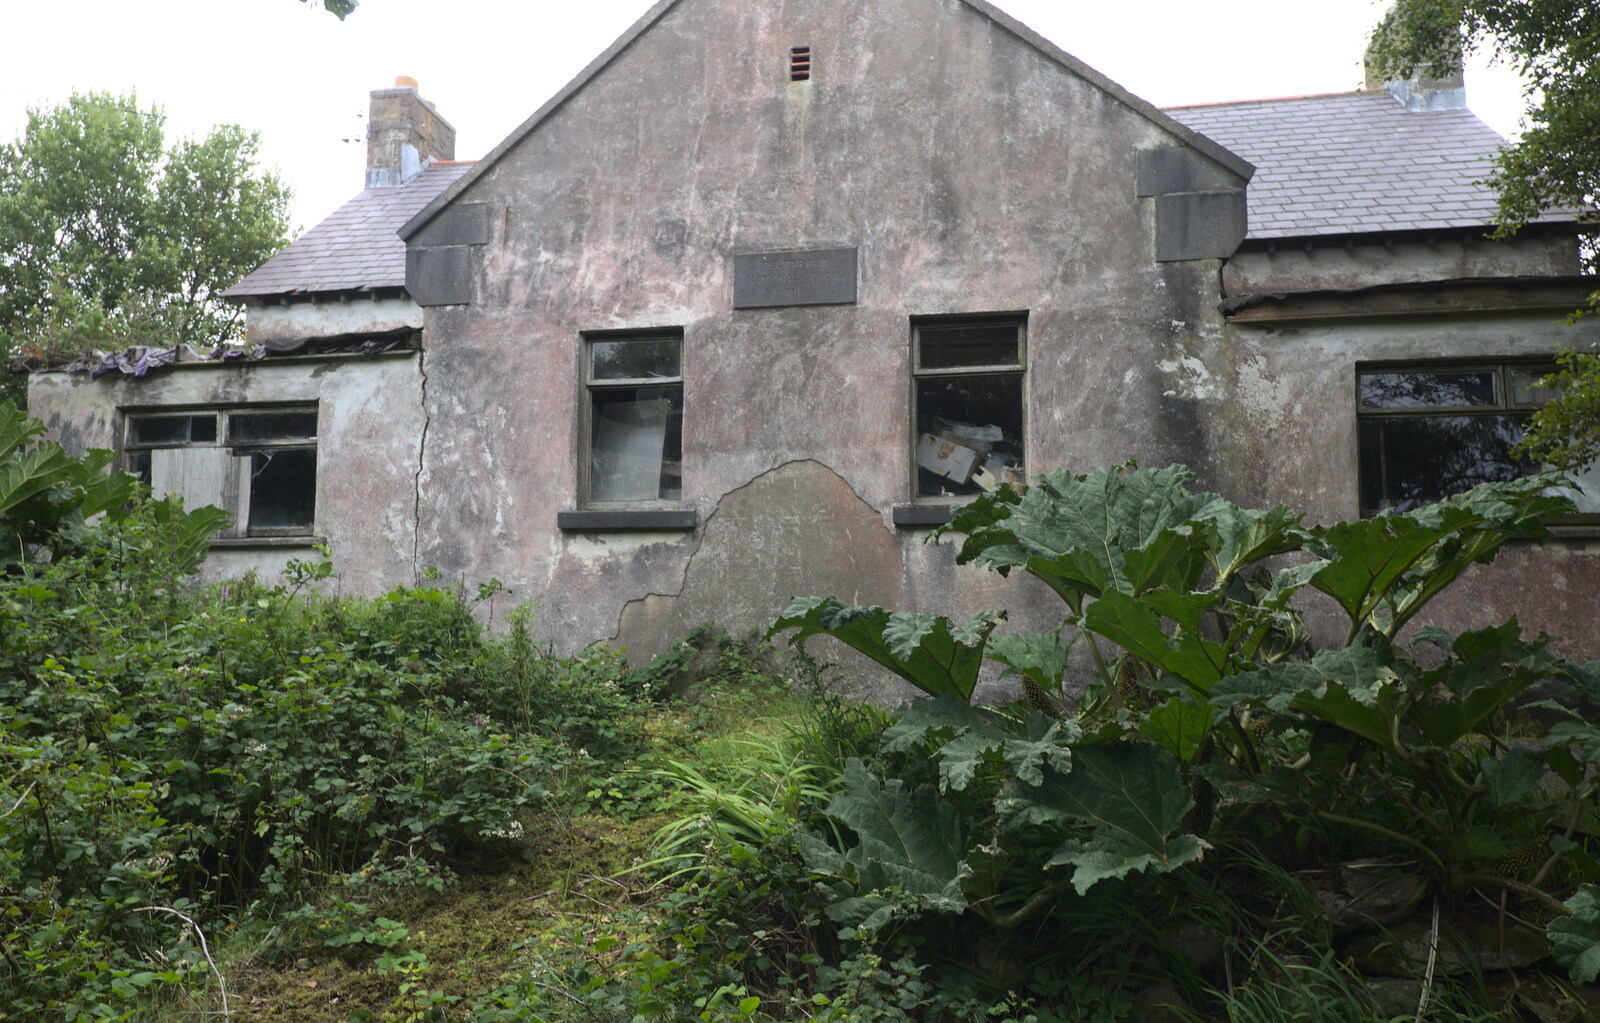 The sadly derelict Belfarsad National School, 1913 from From Achill to Strokestown, Mayo and Roscommon, Ireland - 10th August 2017